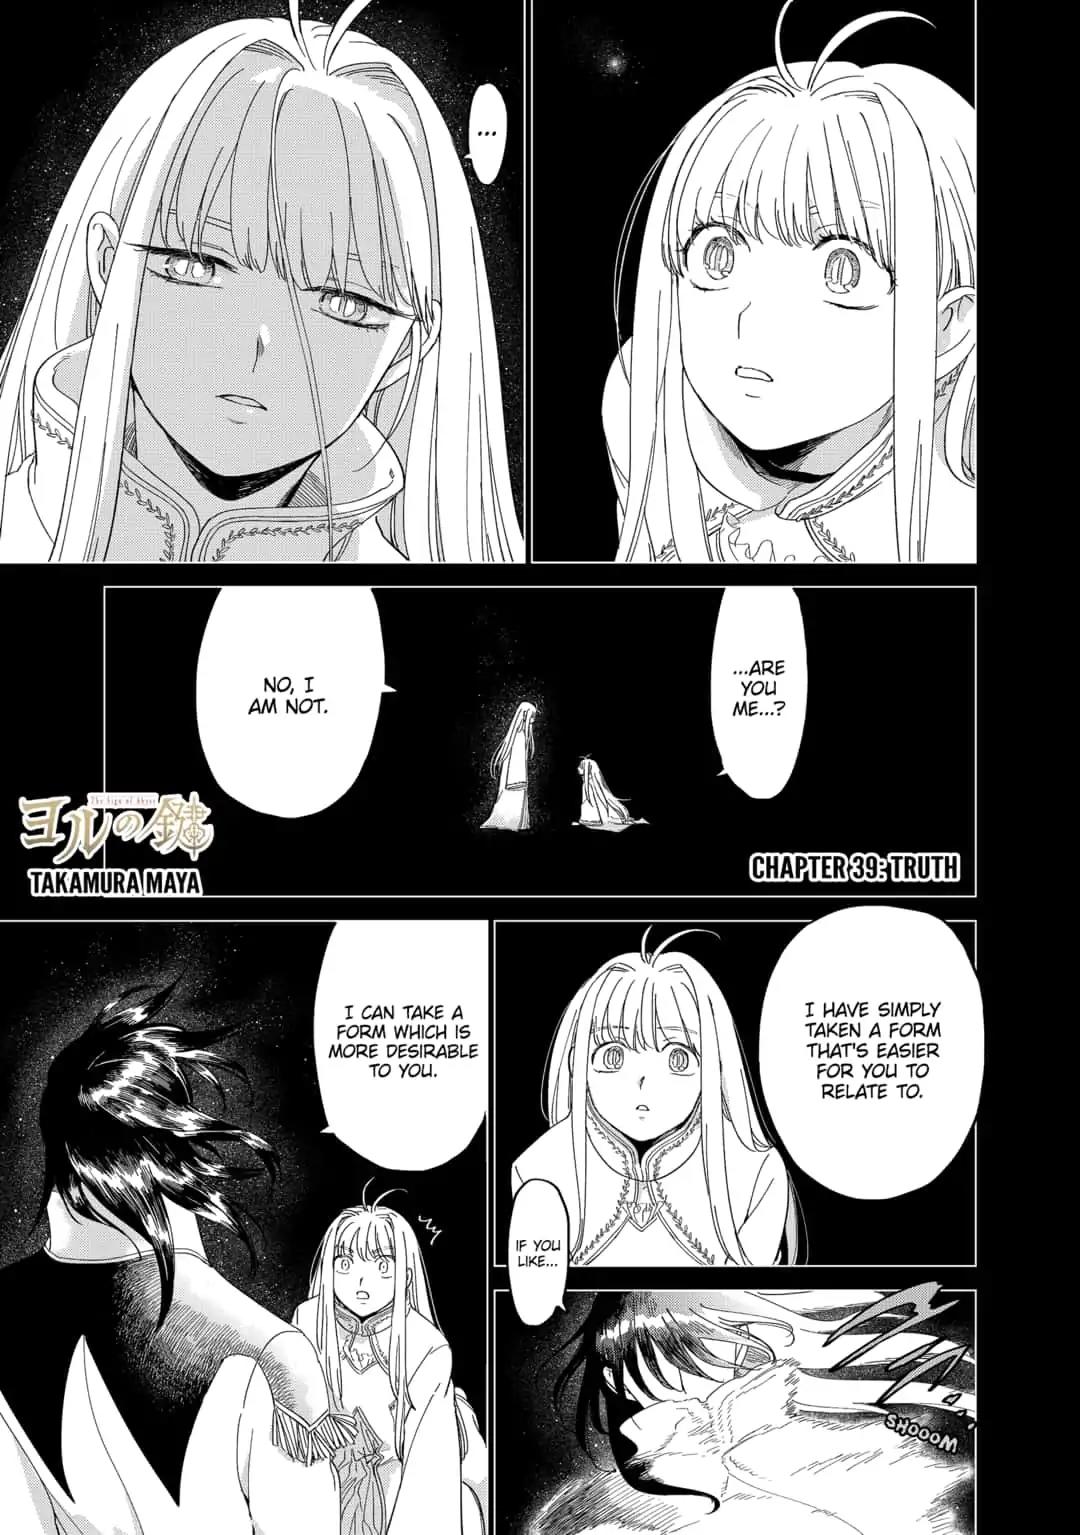 The Sign of Abyss Chapter 39: